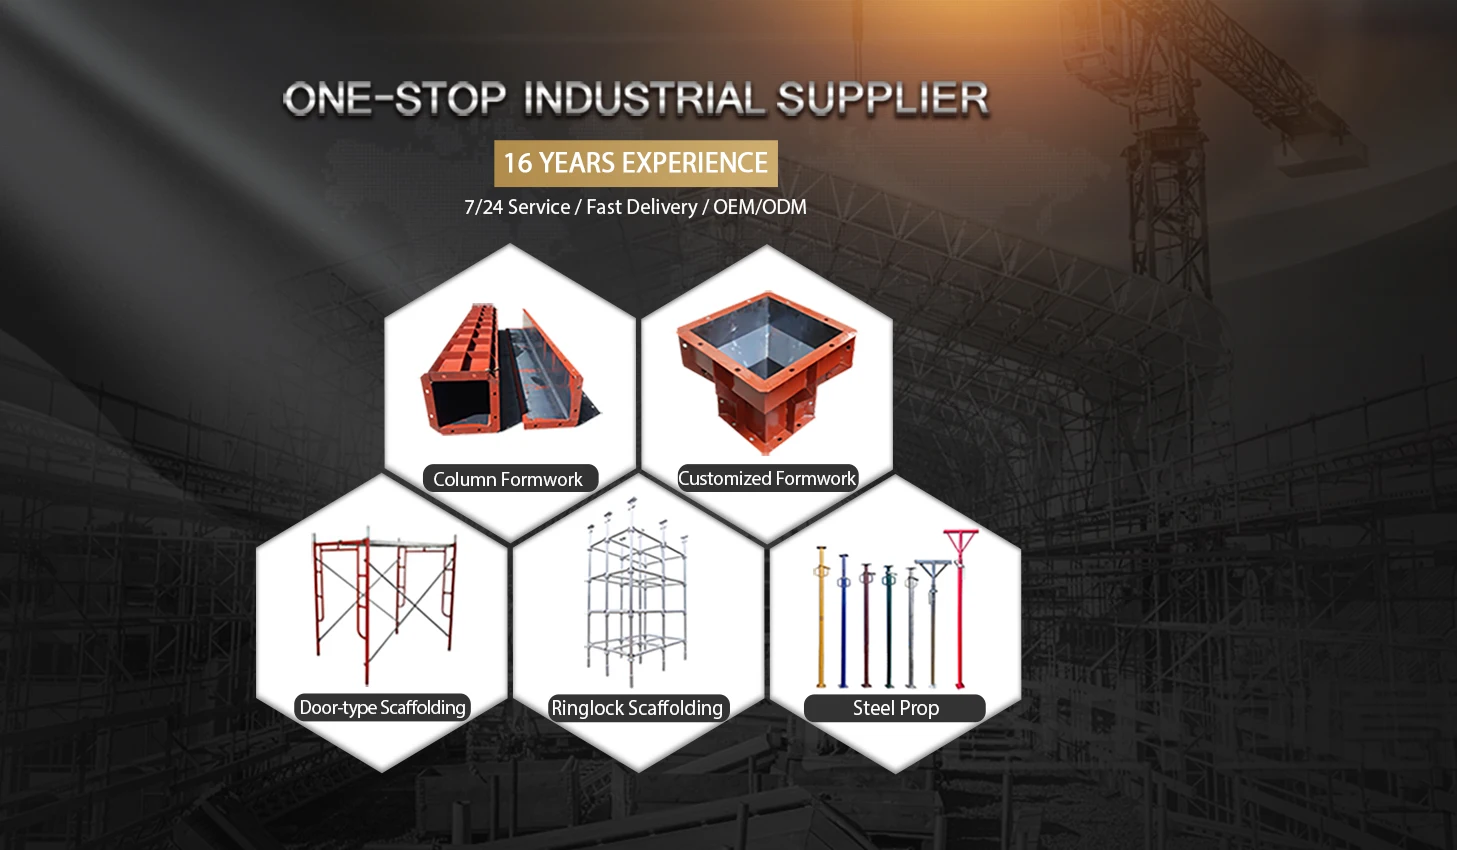 One-Stop Industrial Supplier